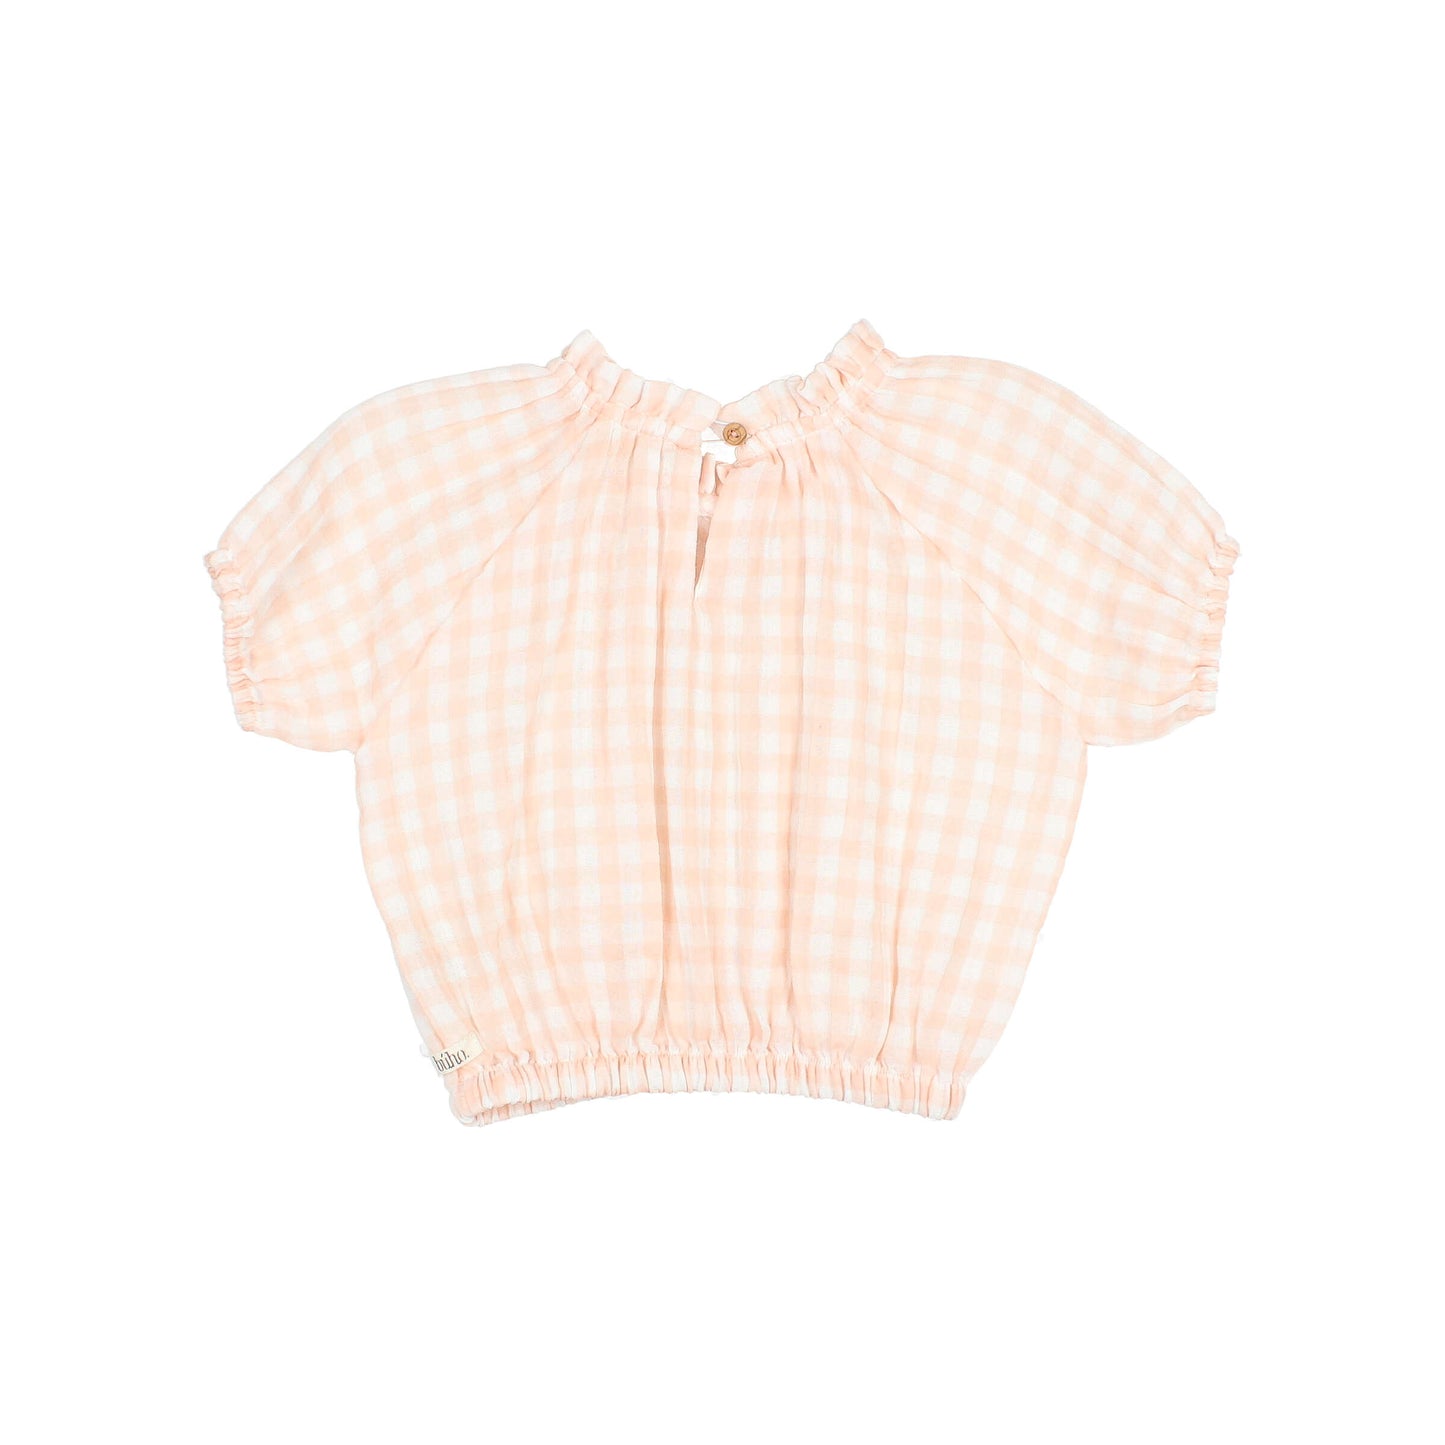 GINGHAM TOP